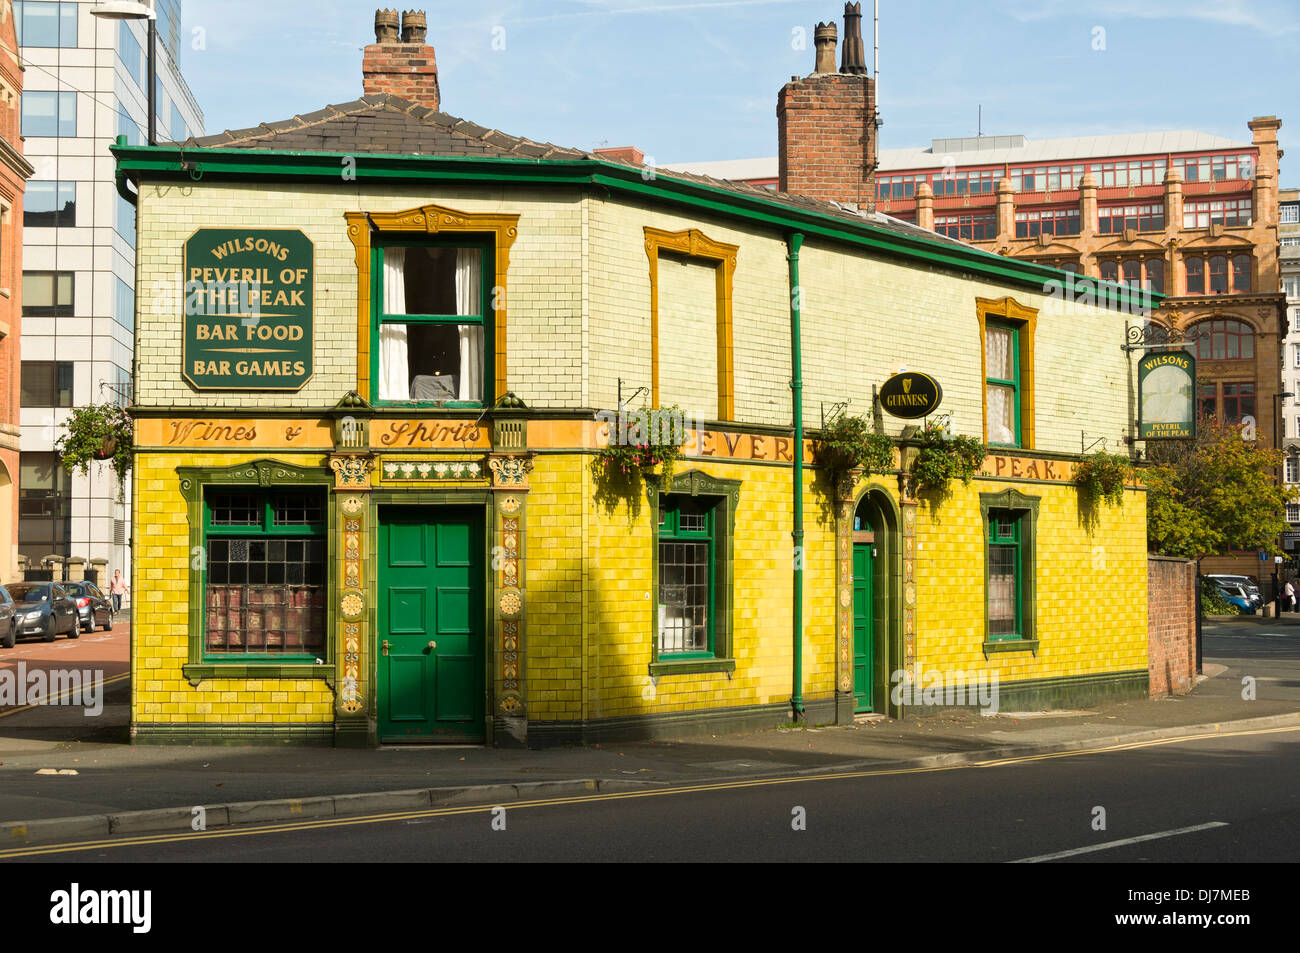 Le Peveril Of The Peak public house, Great Bridgewater Street, Manchester, Angleterre, RU Banque D'Images